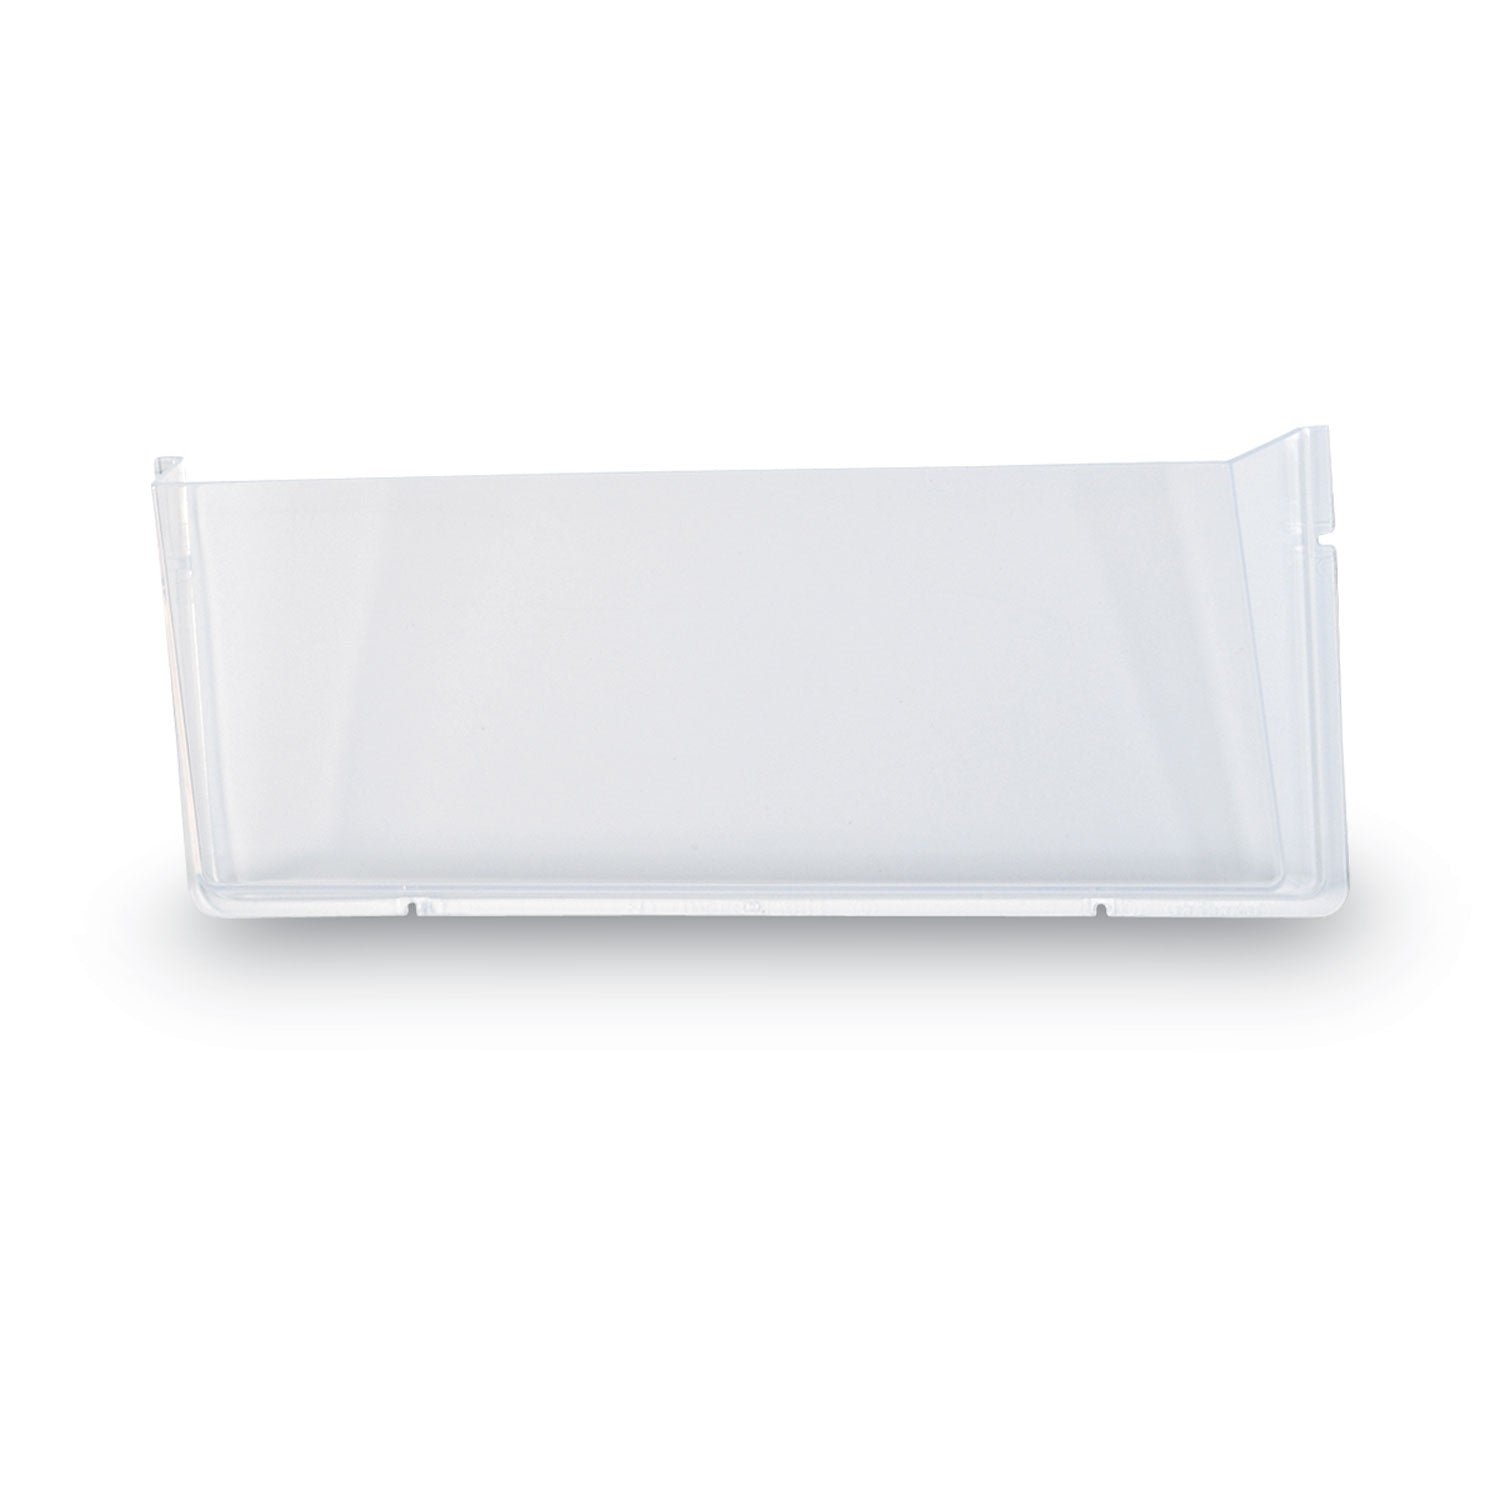 Unbreakable DocuPocket Wall File, Legal Size, 17.5" x 3" x 6.5", Clear - 